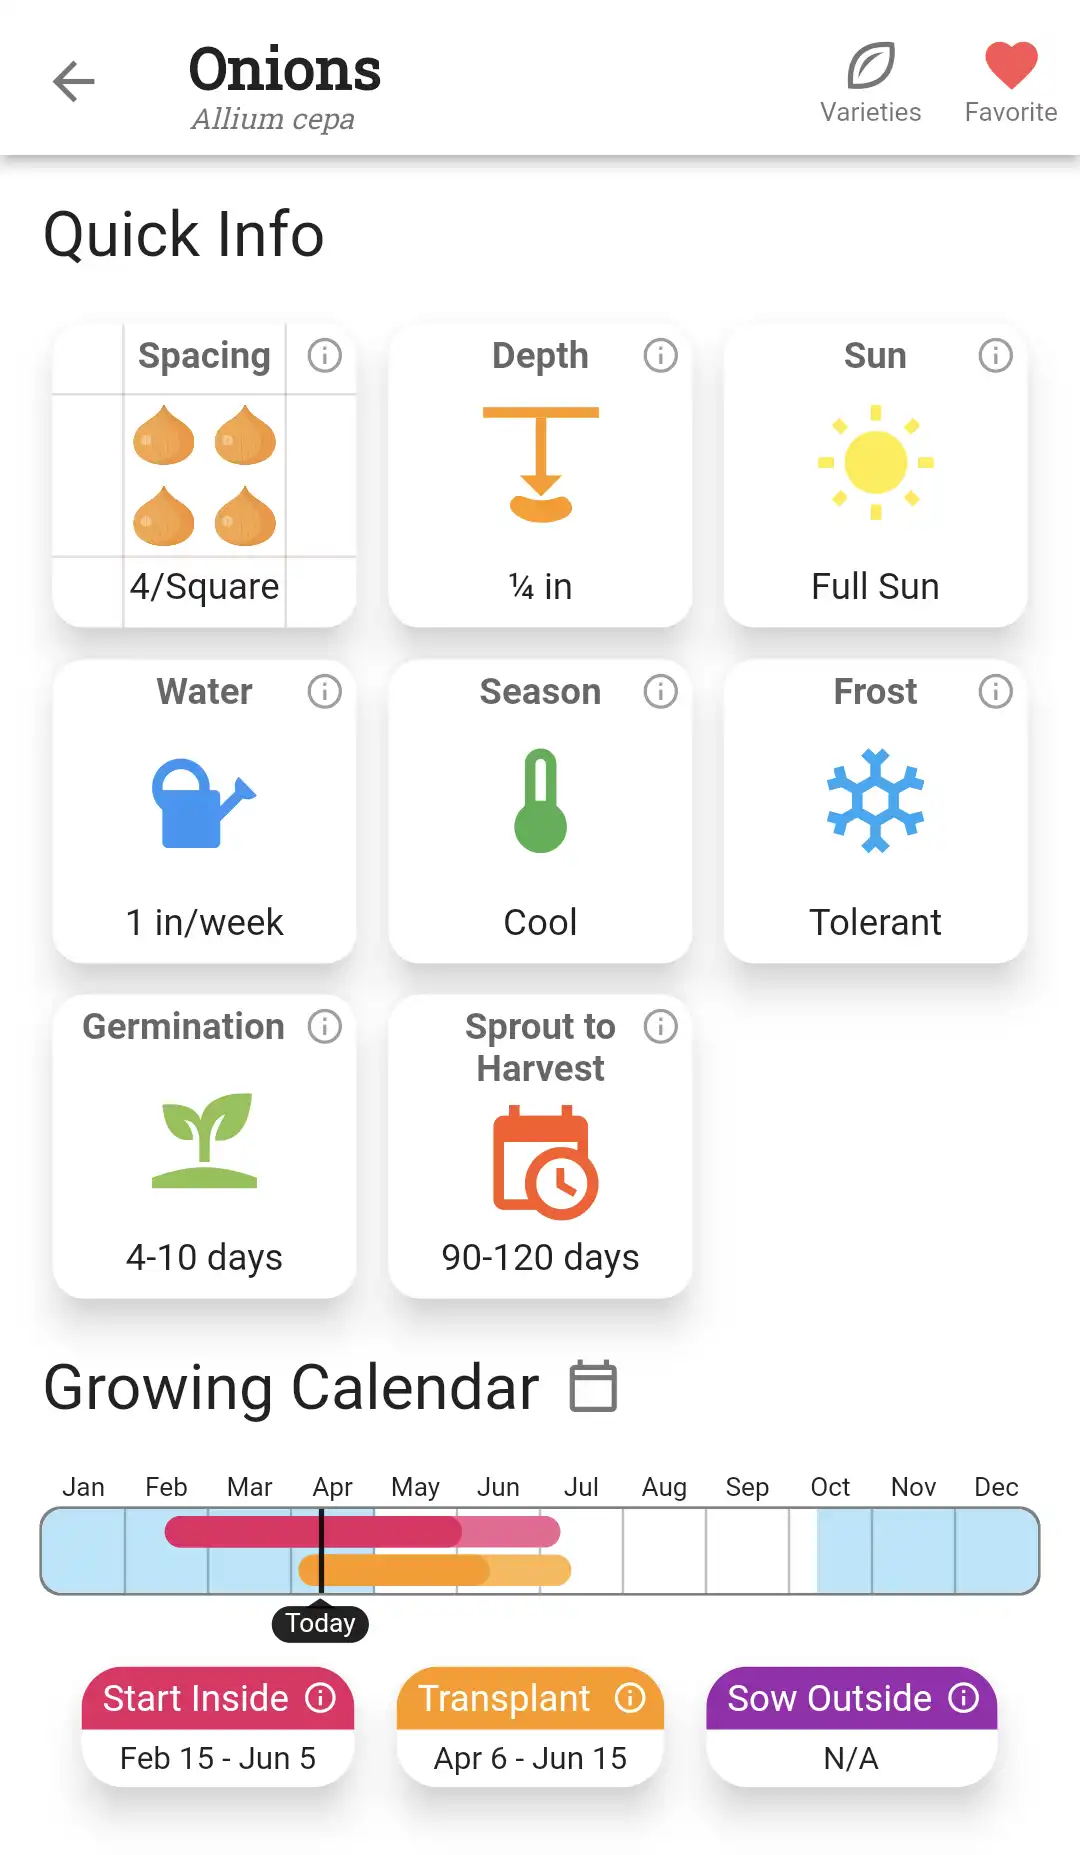 The details page for onions, showing the growing calendar and the Quick Info section.